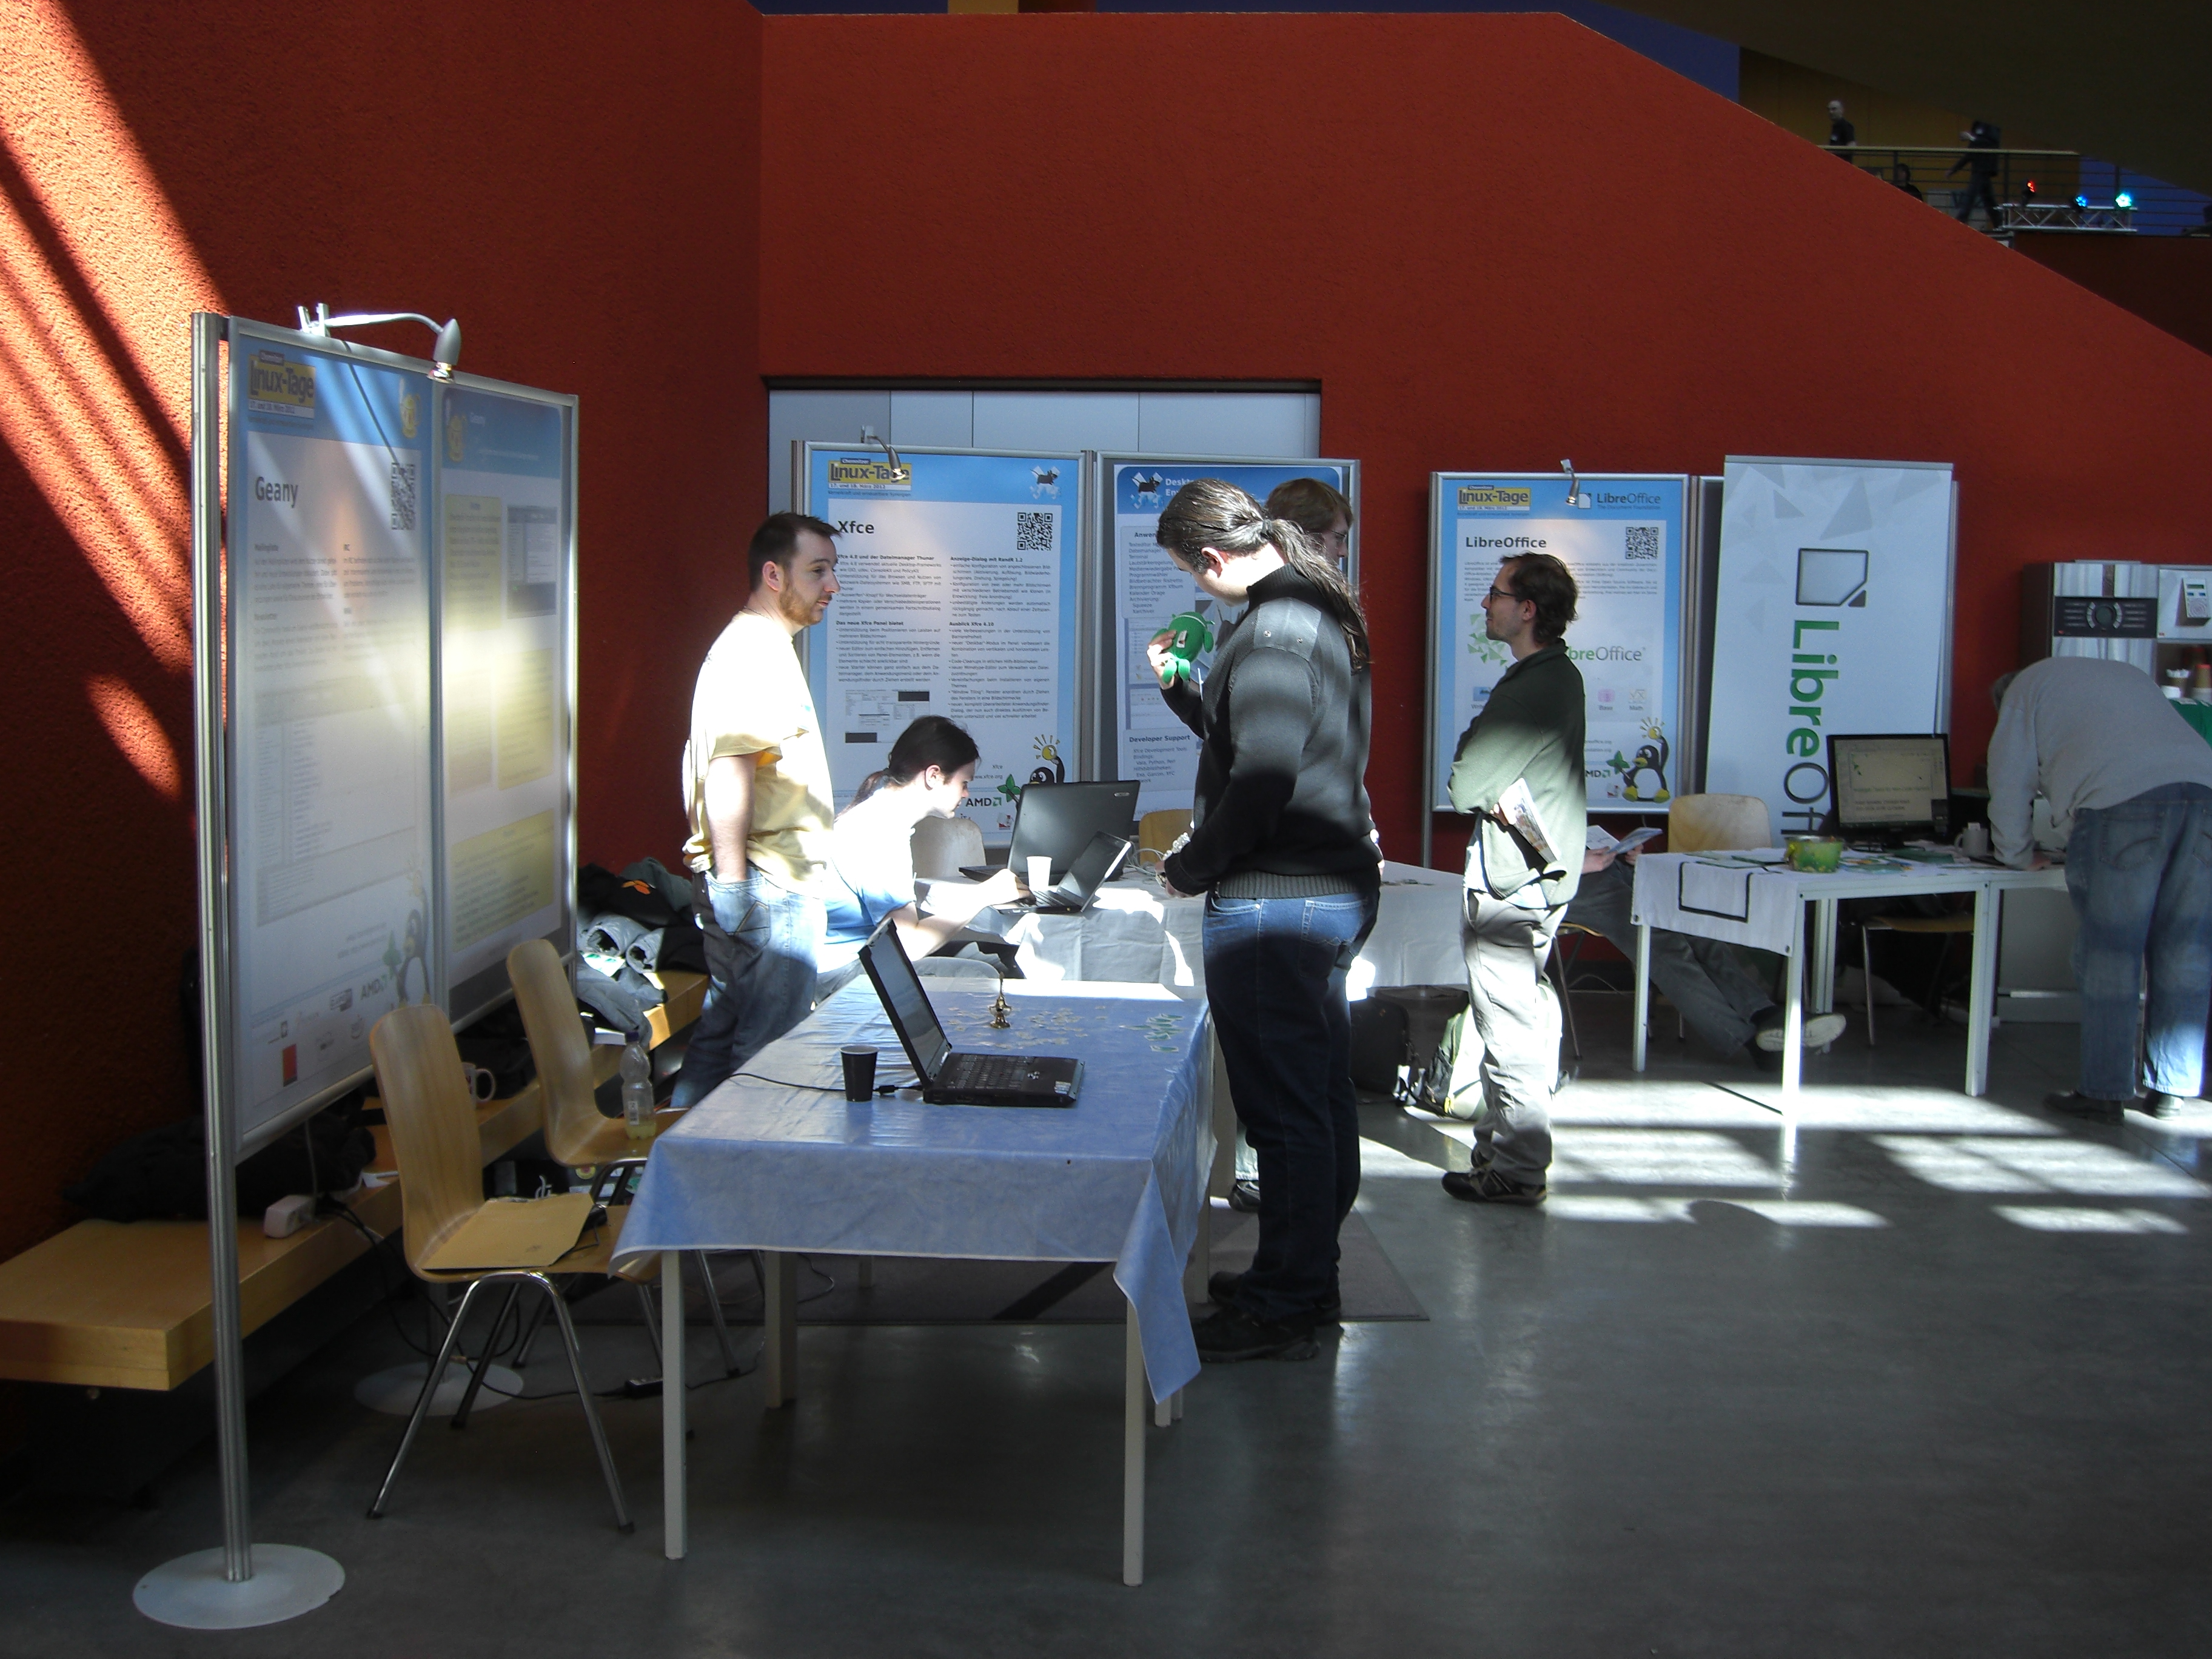 The Xfce and Geany booth at Chemnitzer LinuxTage 2012 (CC: by-nc-sa)